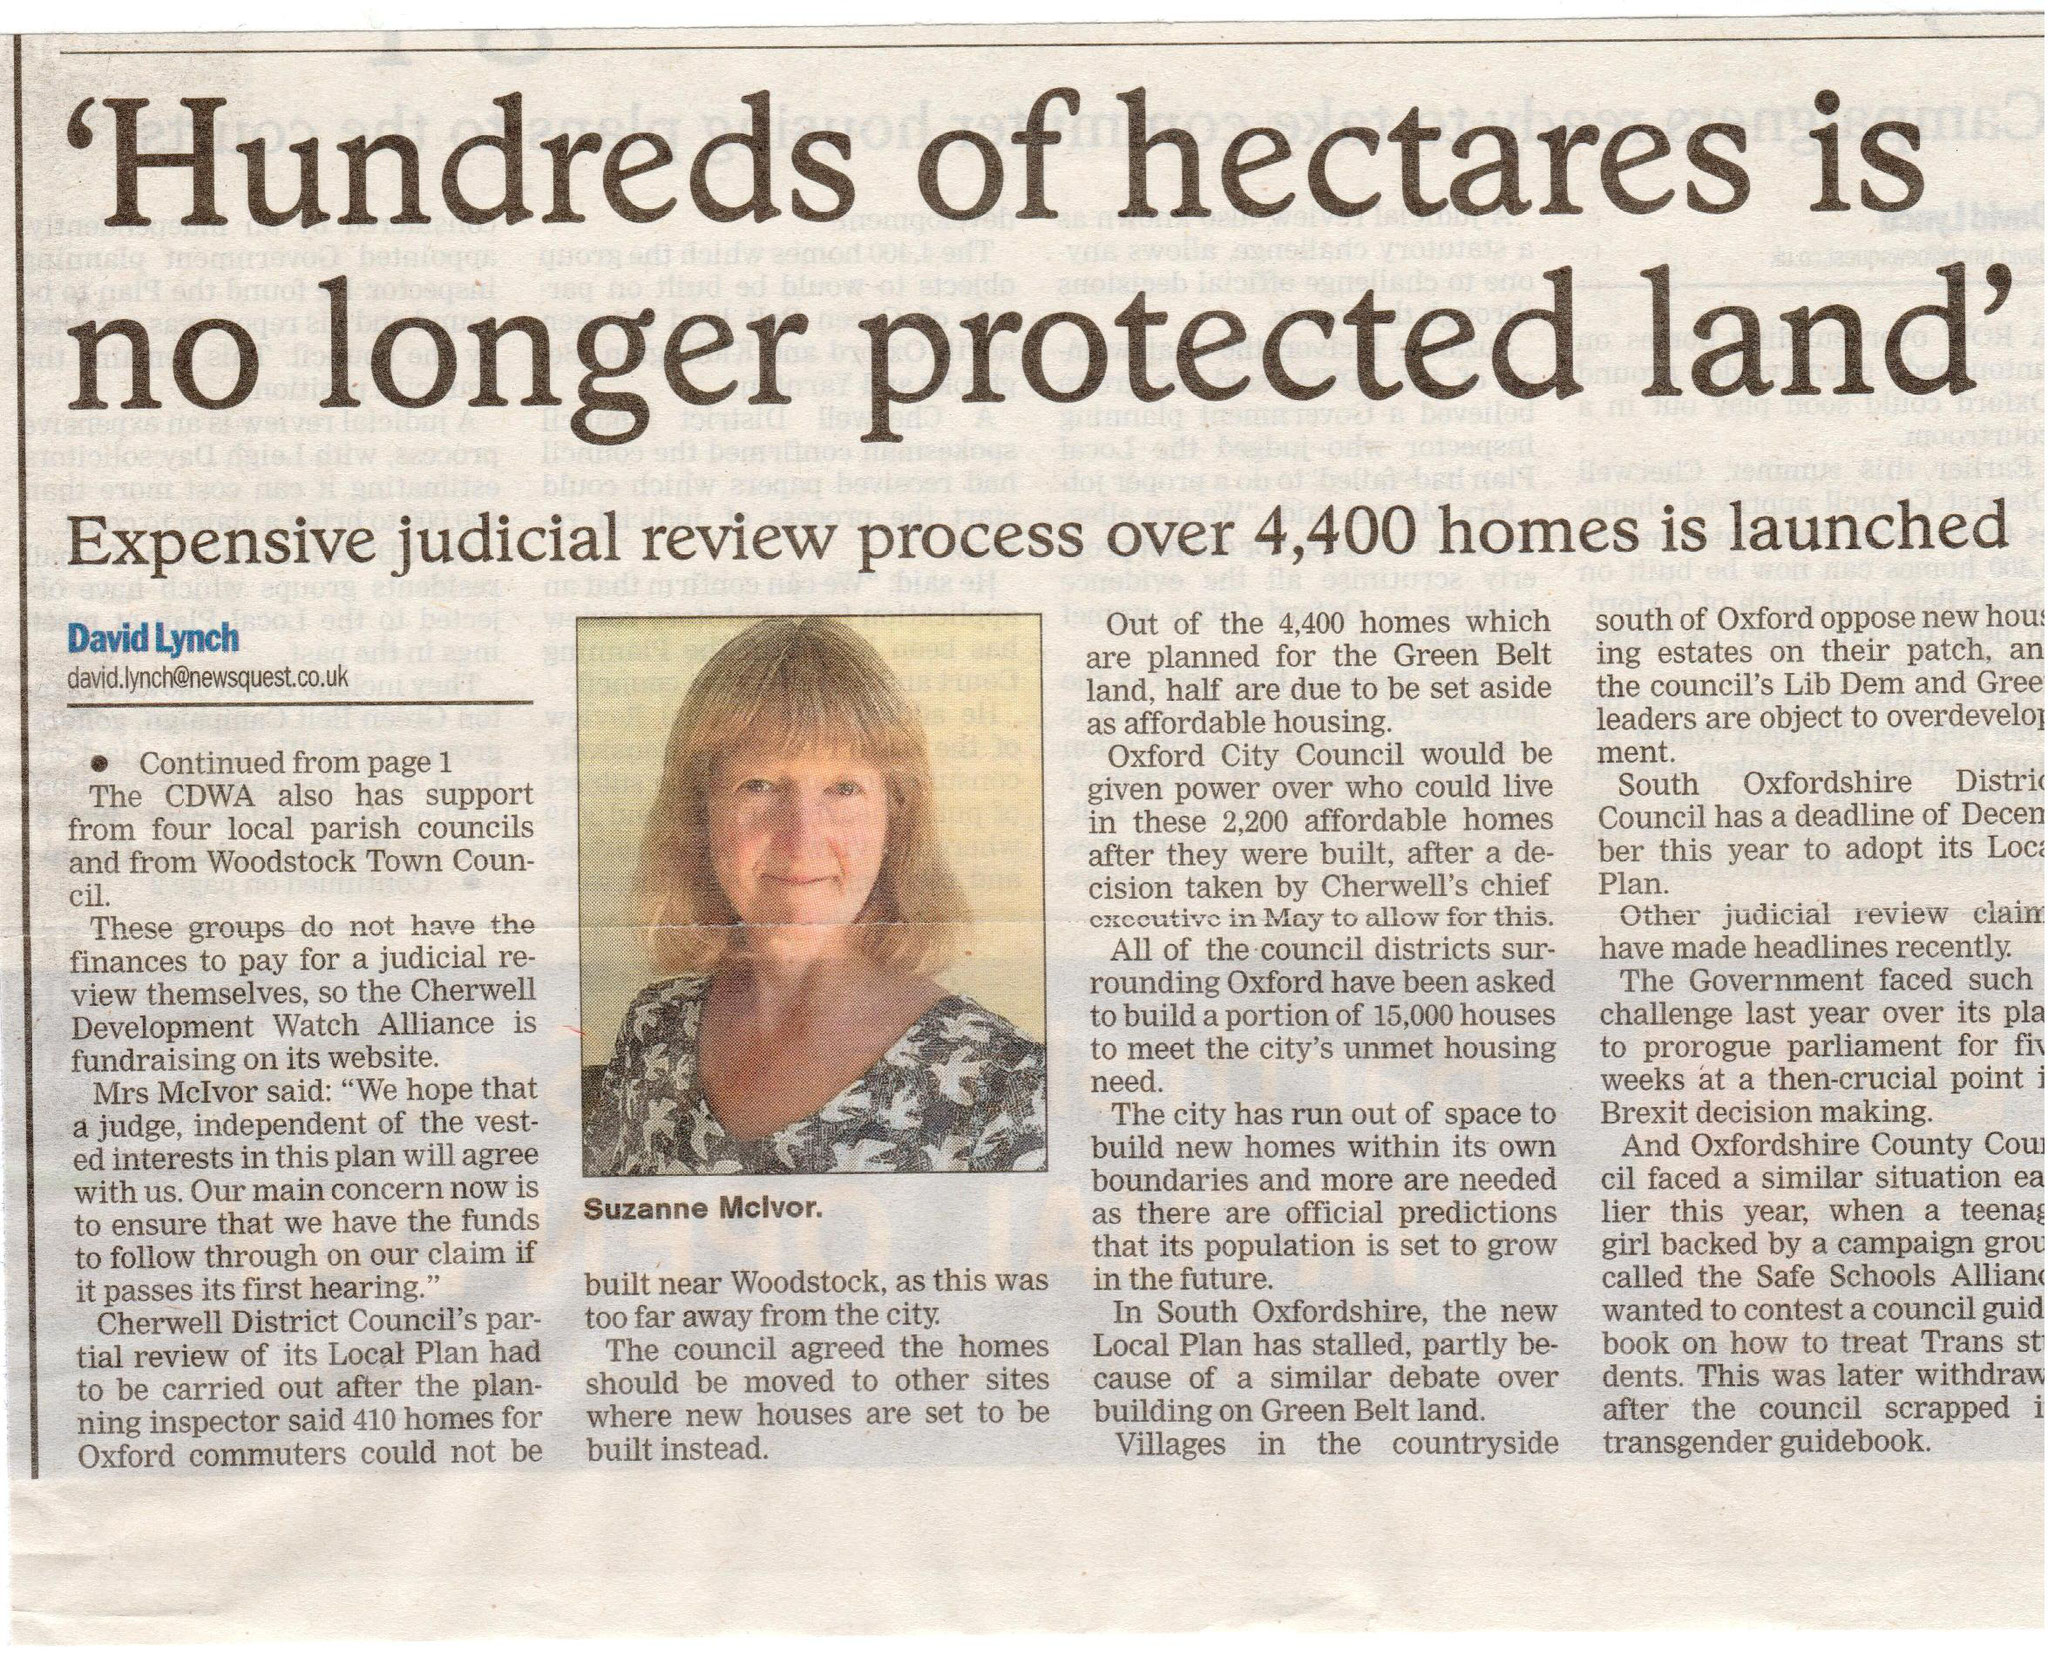 Cherwell Judicial Review continued